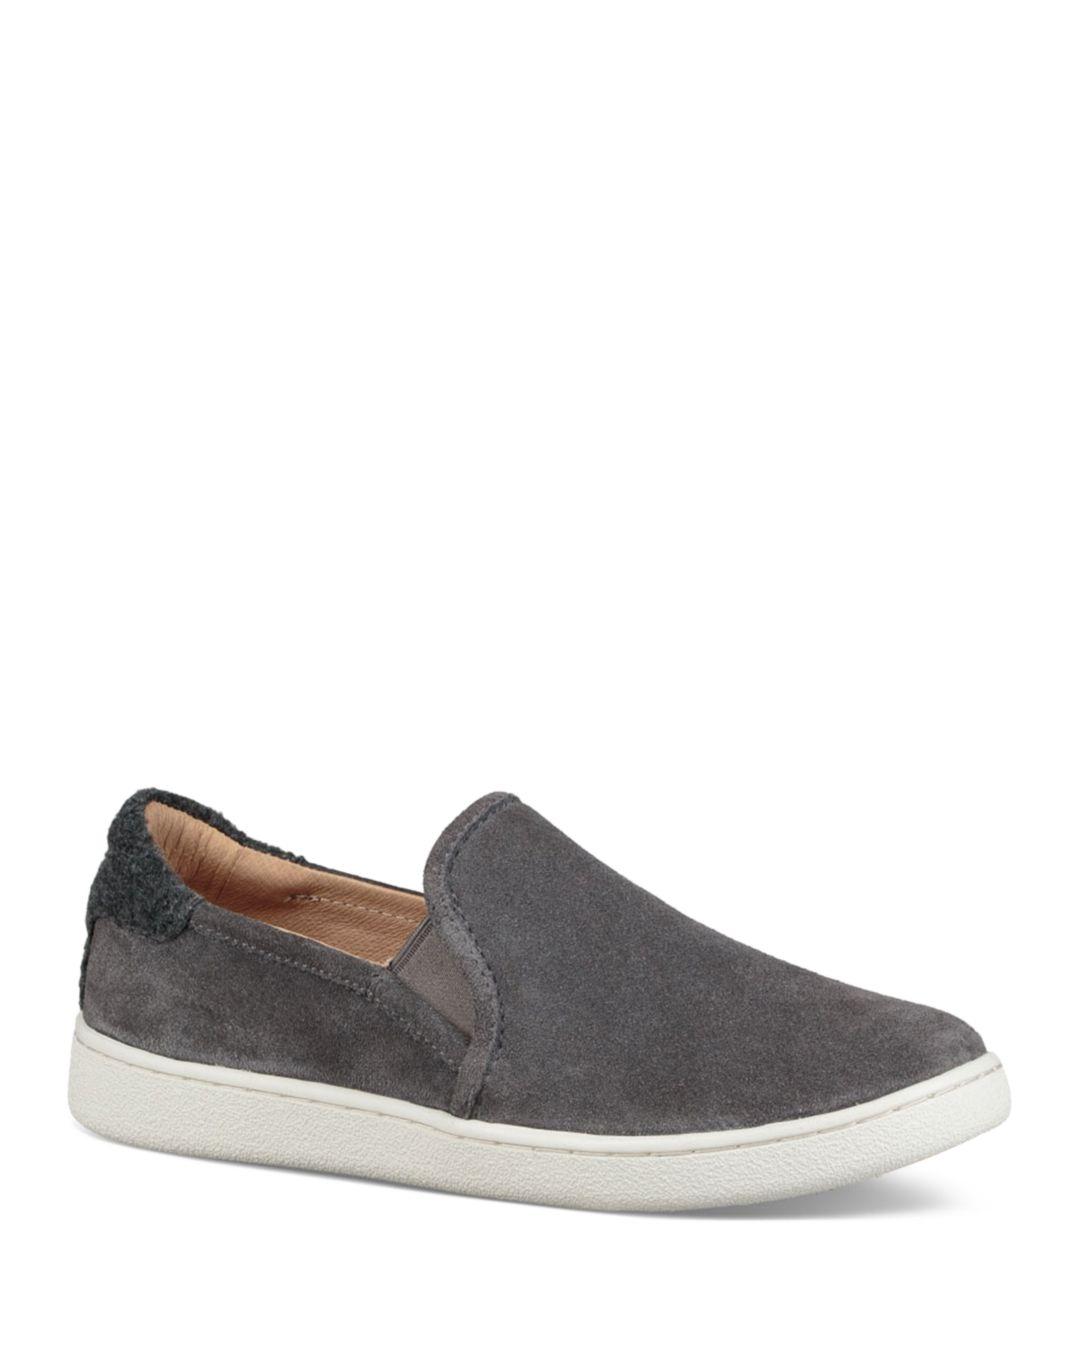 UGG Leather Women's Cas Suede Slip - On Sneakers in Charcoal (Gray) - Lyst